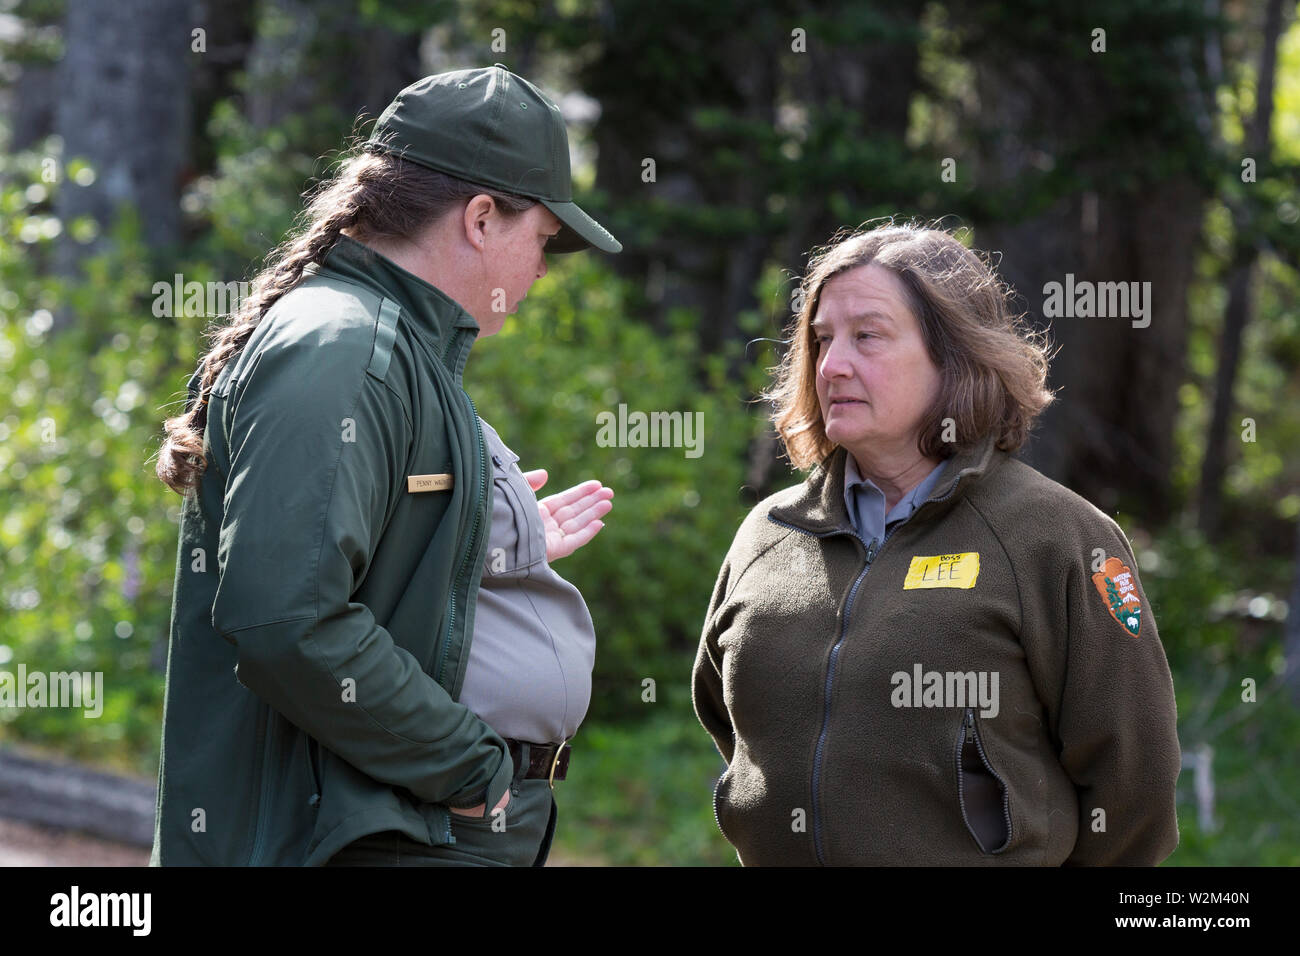 Ranger Penny Wagner (left) speaks to Deputy Park Superintendent Lee Taylor at Hurricane Ridge in Olympic National Park, Washington on July 9, 2019. Today is the second day of a two-week long capture and translocation process moving mountain goats from Olympic National Park to the northern Cascade Mountains. The effort is a collaboration between the National Park Service, the Washington Department of Fish & Wildlife and the USDA Forest Service to re-establish depleted populations of mountain goats in the Northern Cascades while also removing non-native goats from the Olympic Mountains. The anim Stock Photo